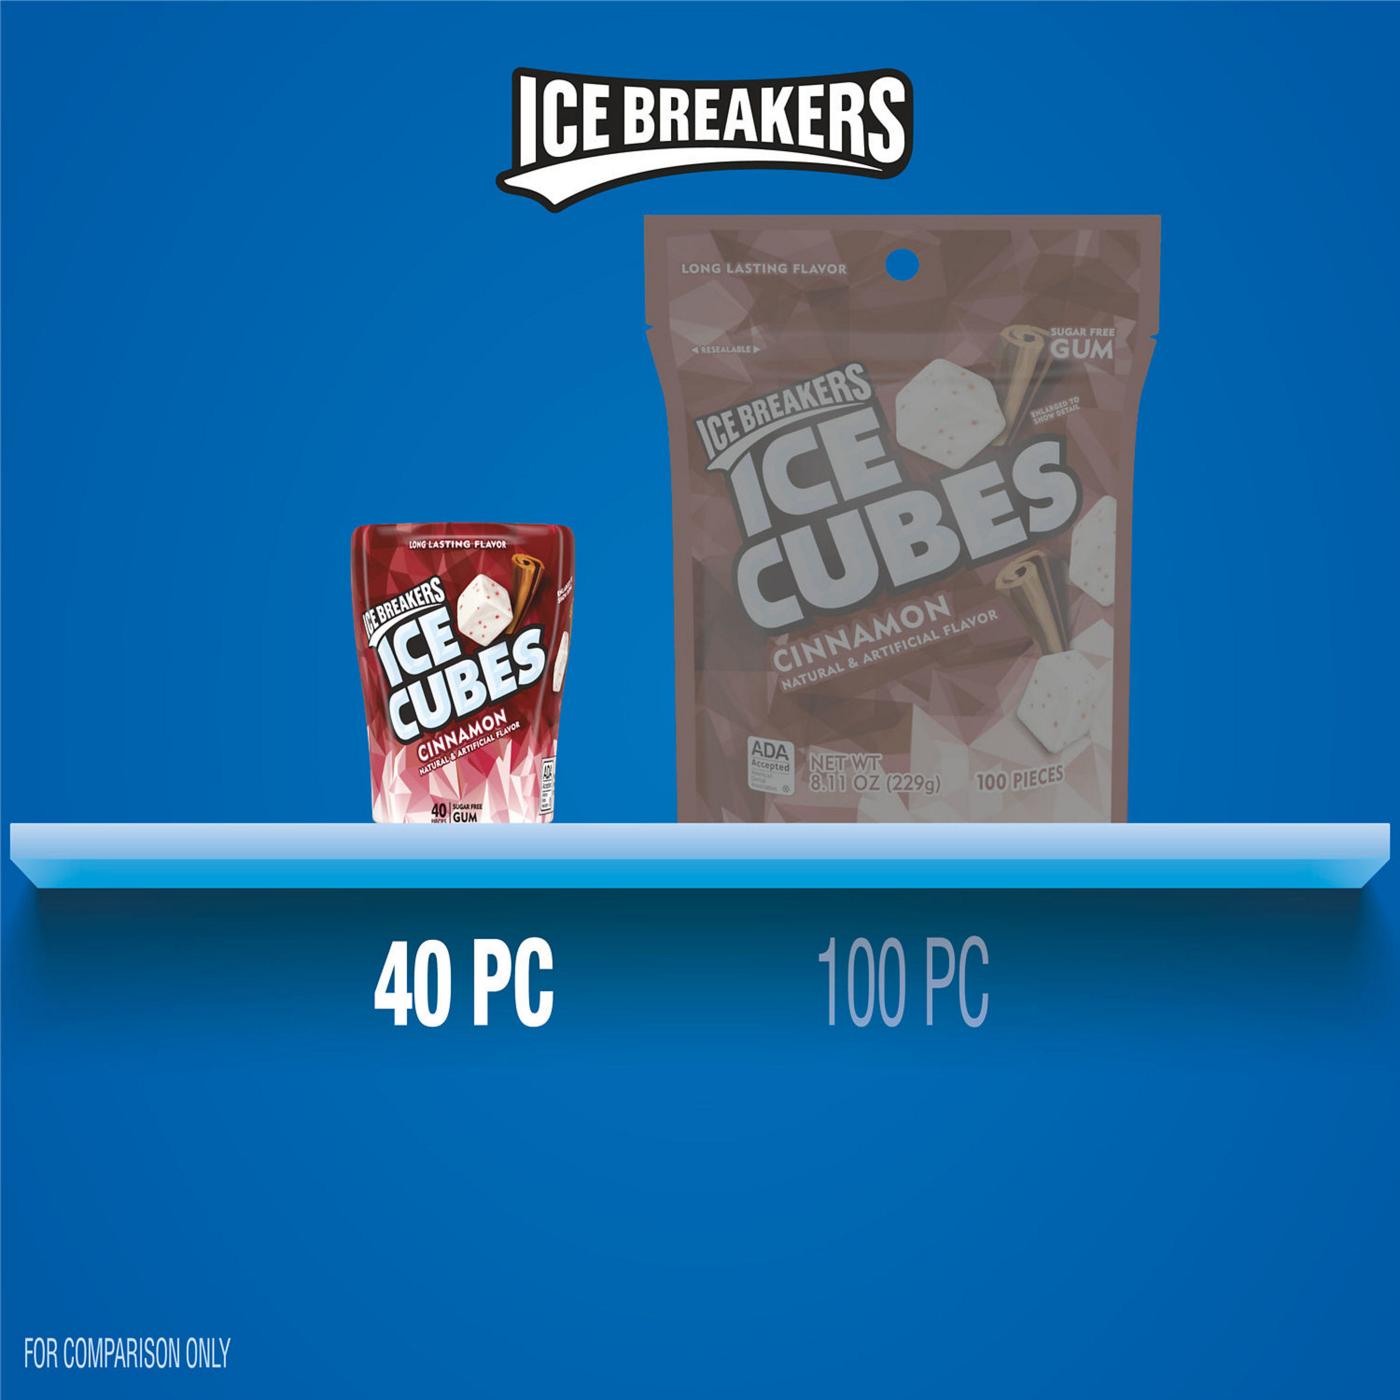 Ice Breakers Ice Cubes Cinnamon Sugar Free Chewing Gum Bottle; image 2 of 7